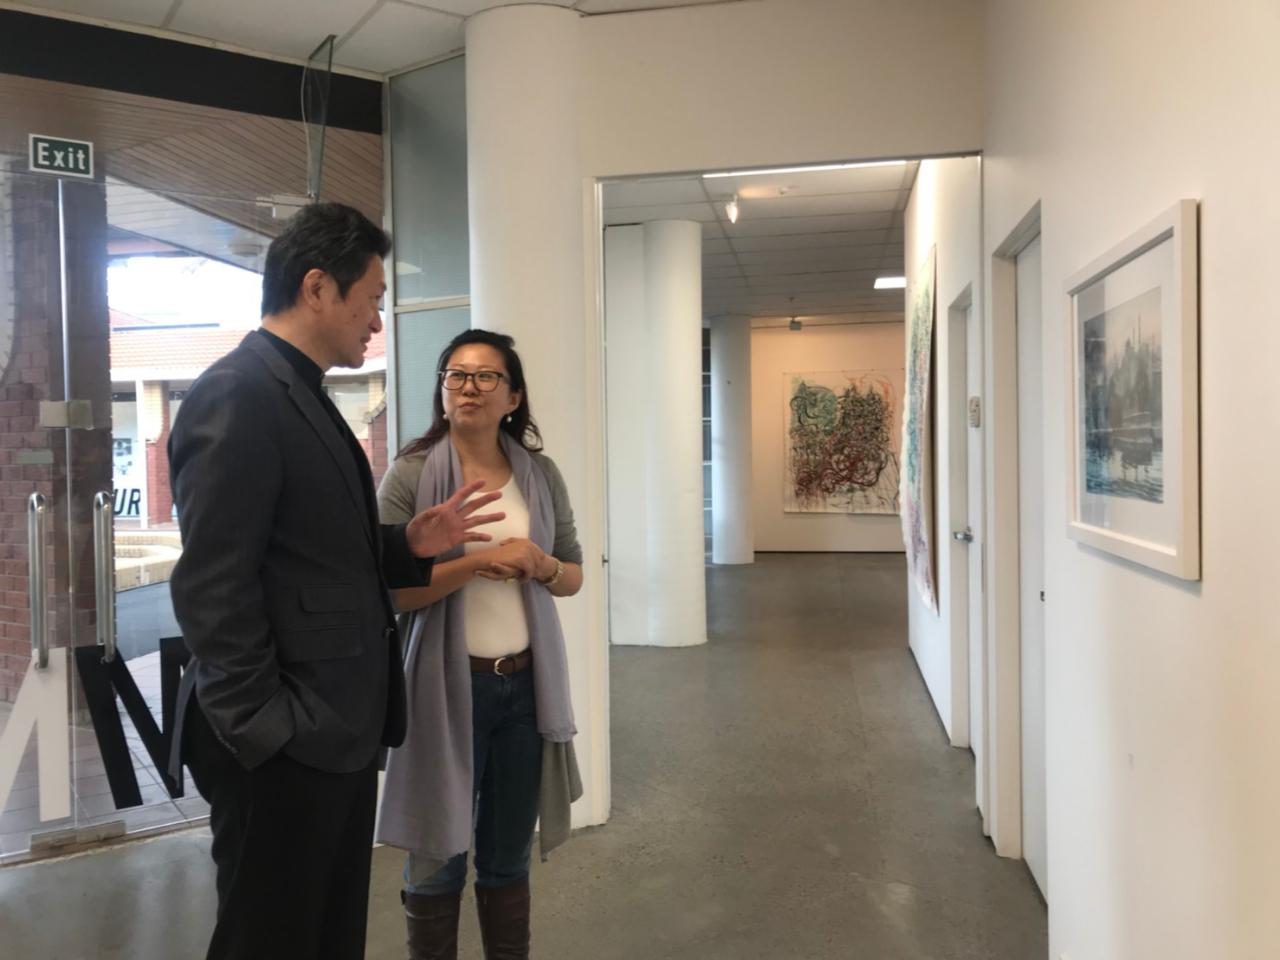 The artist Ms.Ginette explained her artwork to Dr. Chou.